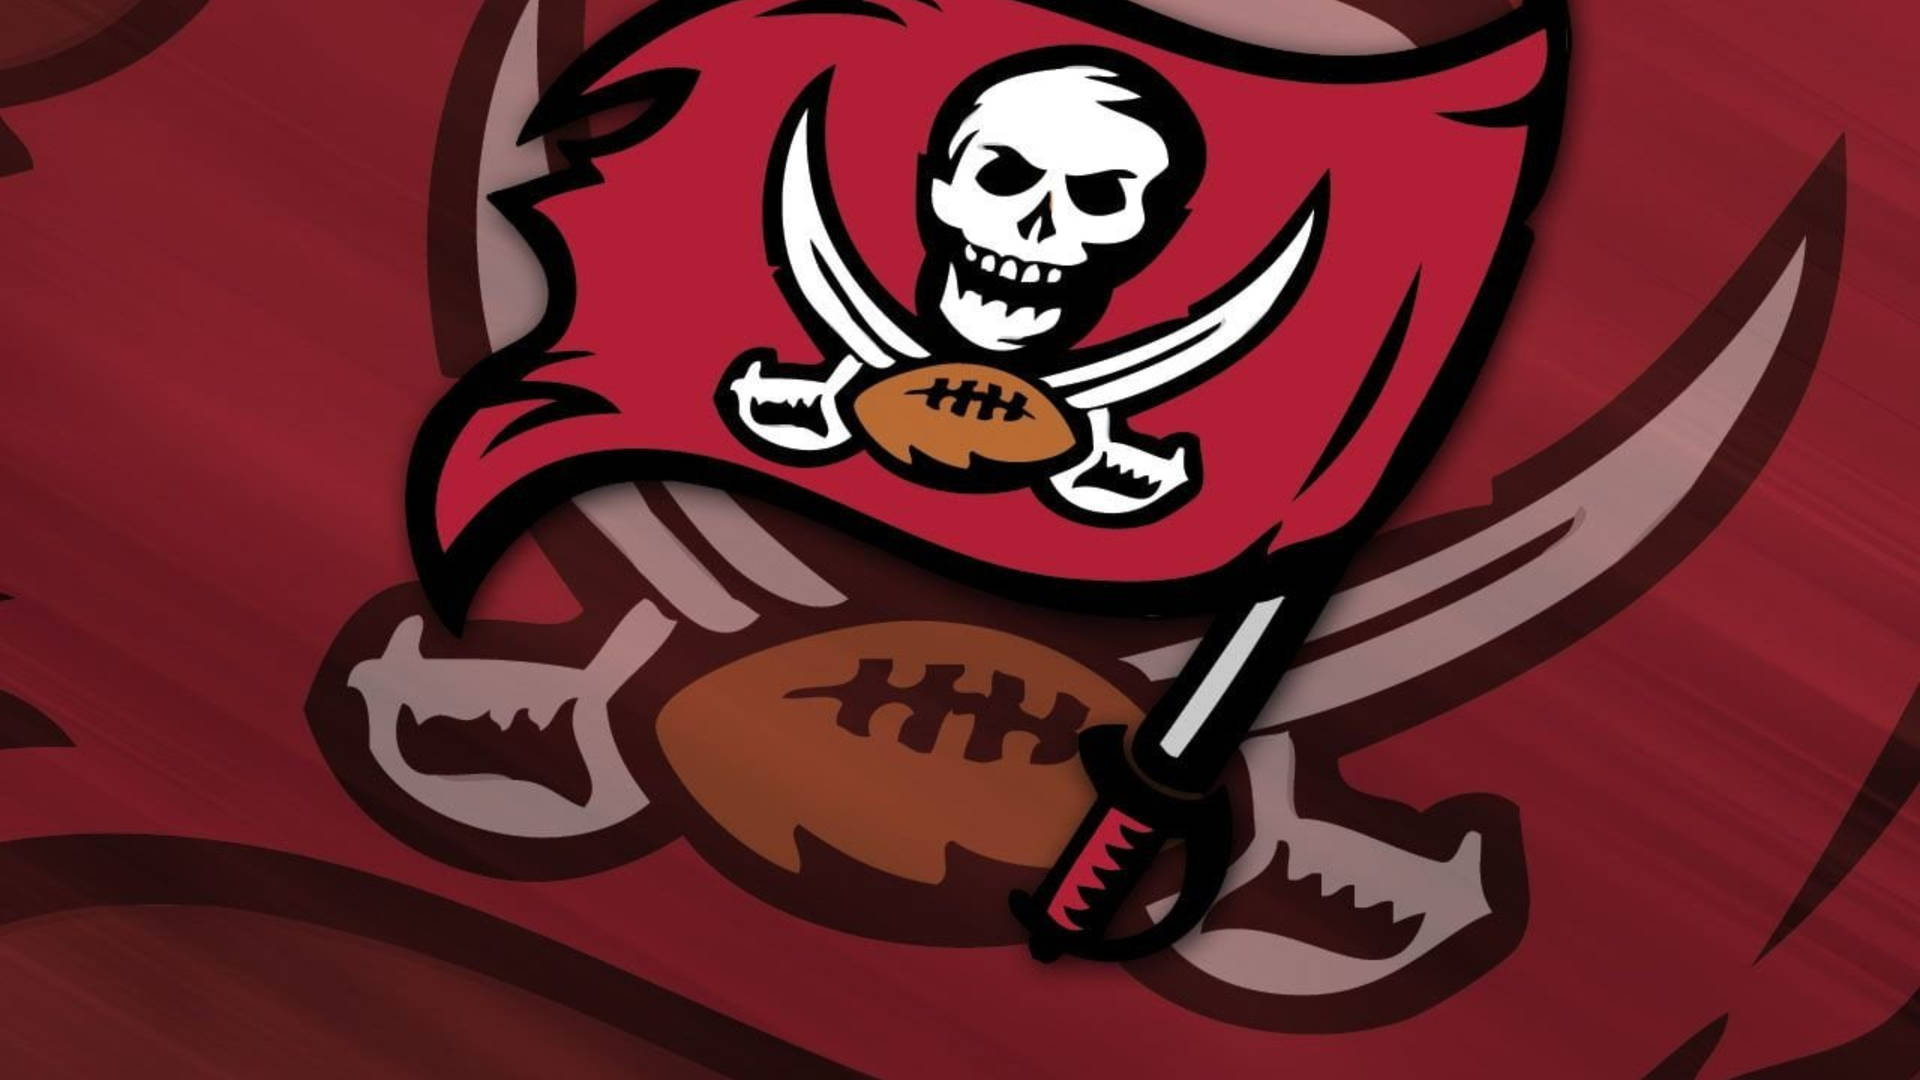 Tampa Bay Buccaneers Graphic Logo Background